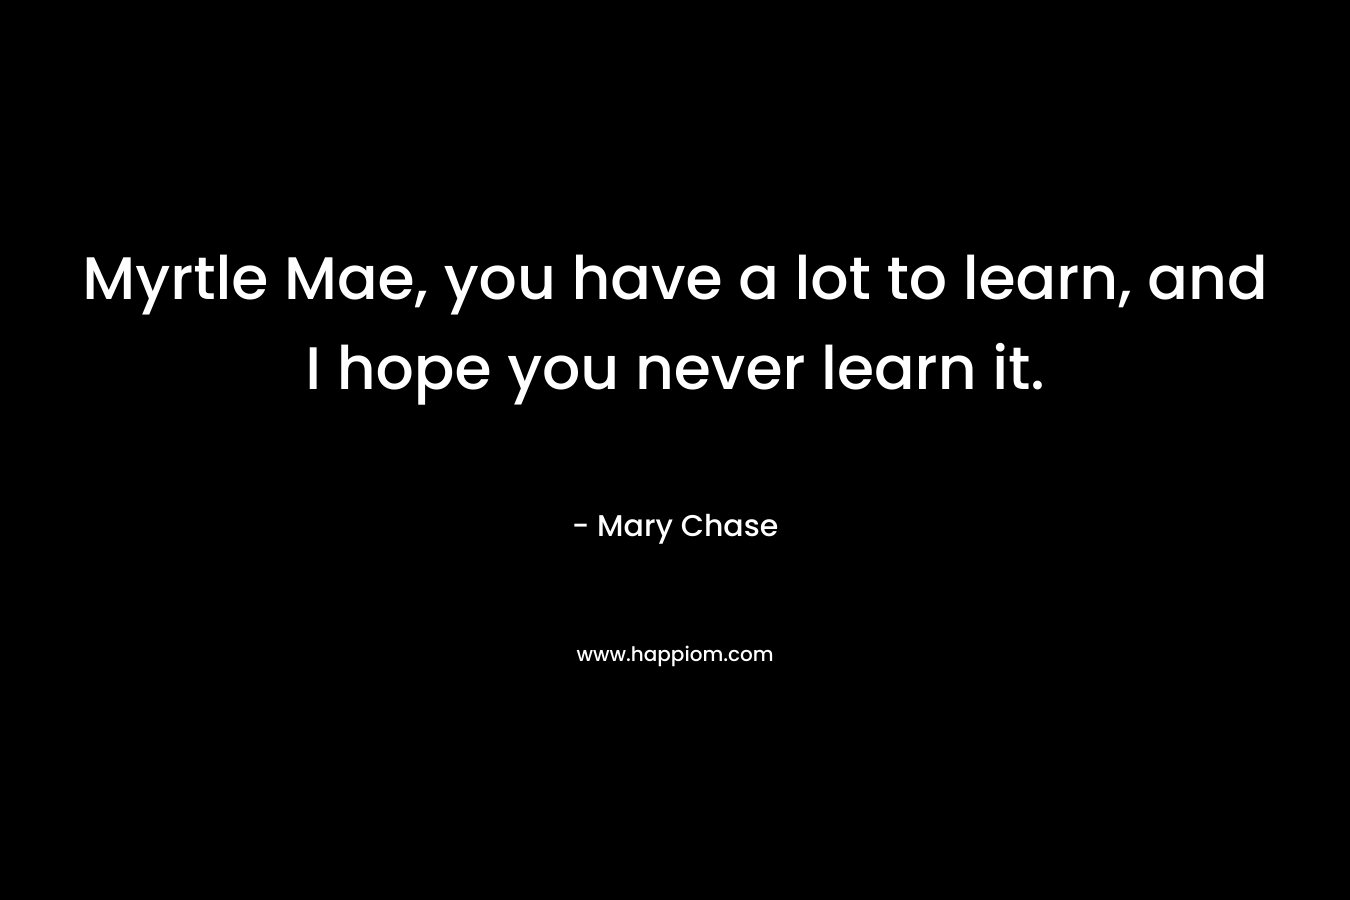 Myrtle Mae, you have a lot to learn, and I hope you never learn it. – Mary Chase